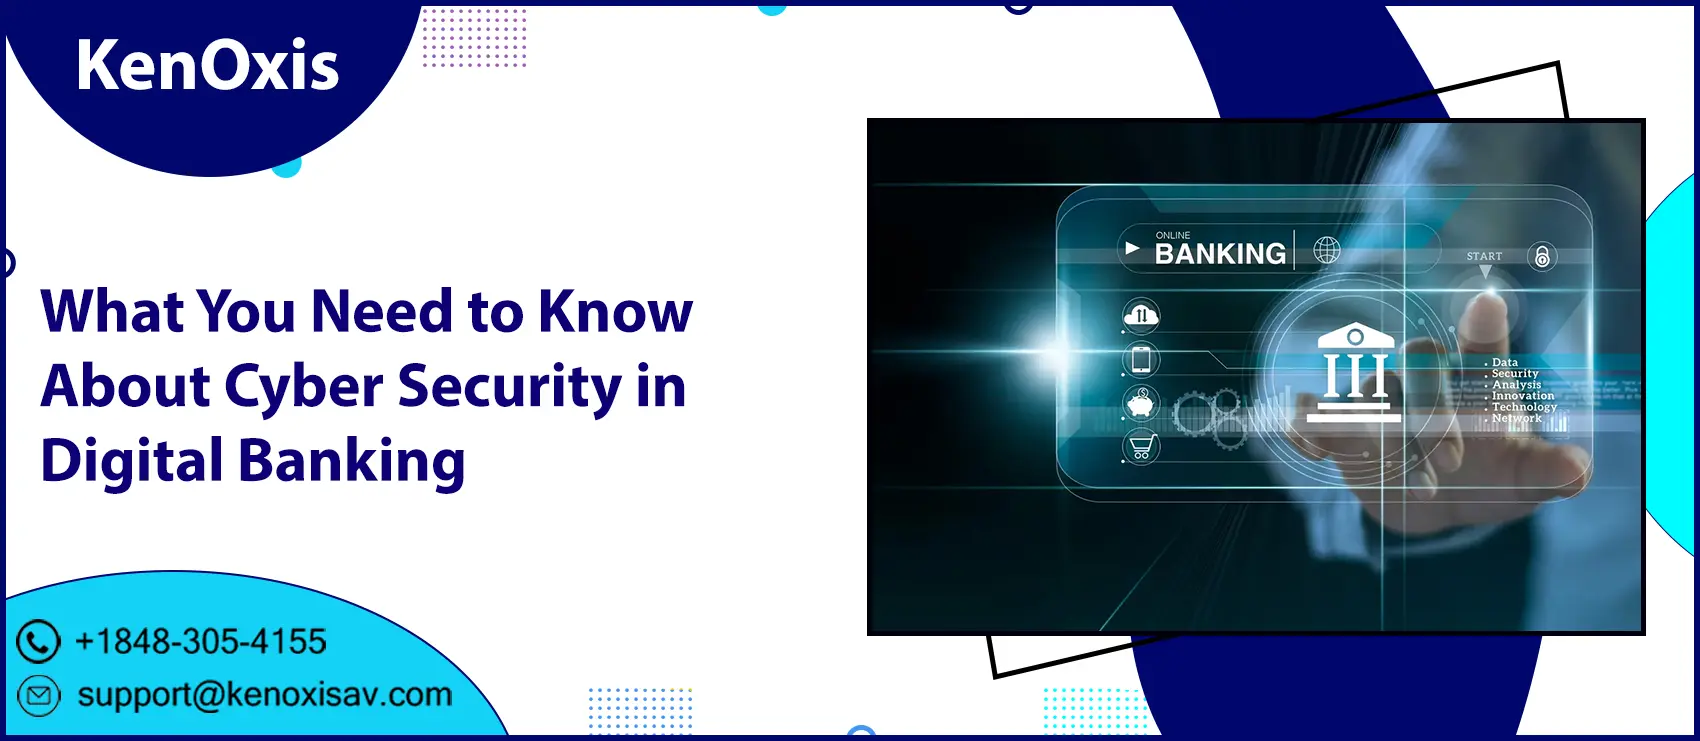 What You Need to Know About Cyber Security in Digital Banking